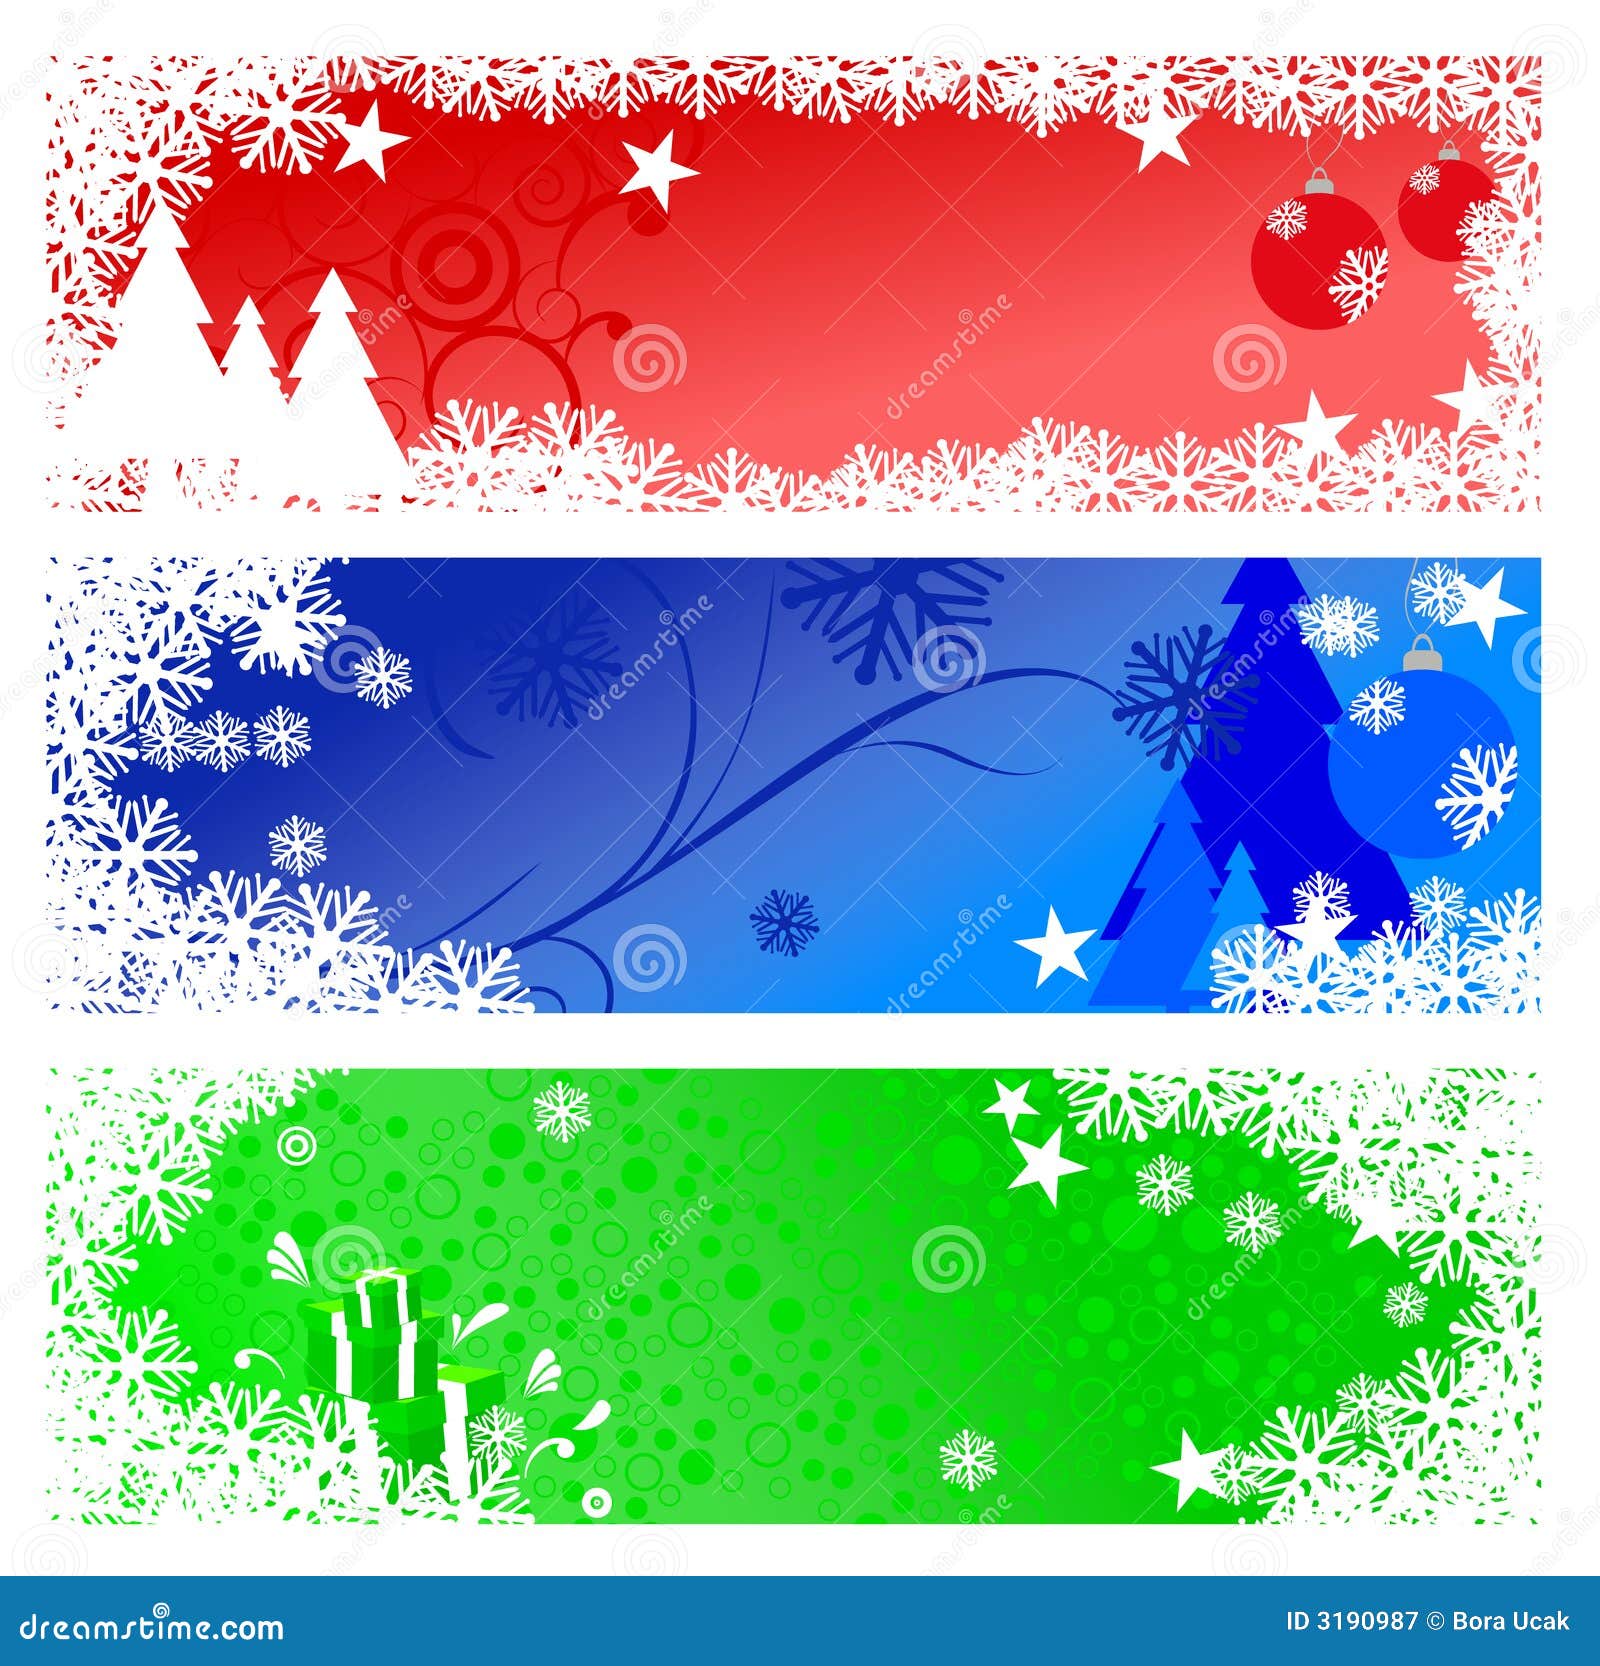 Christmas banners stock vector. Illustration of design - 3190987